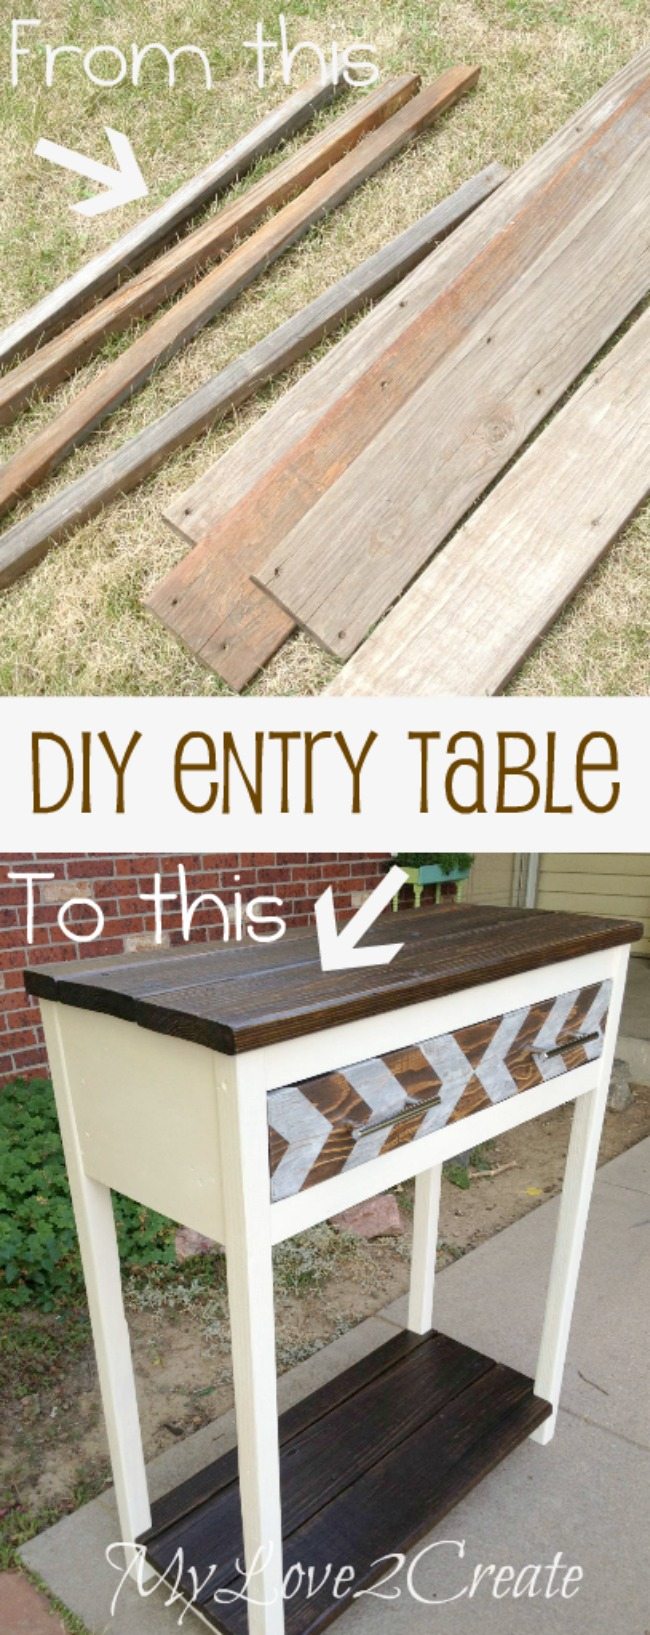 Entry Table made with old deck and scrap wood, before and after